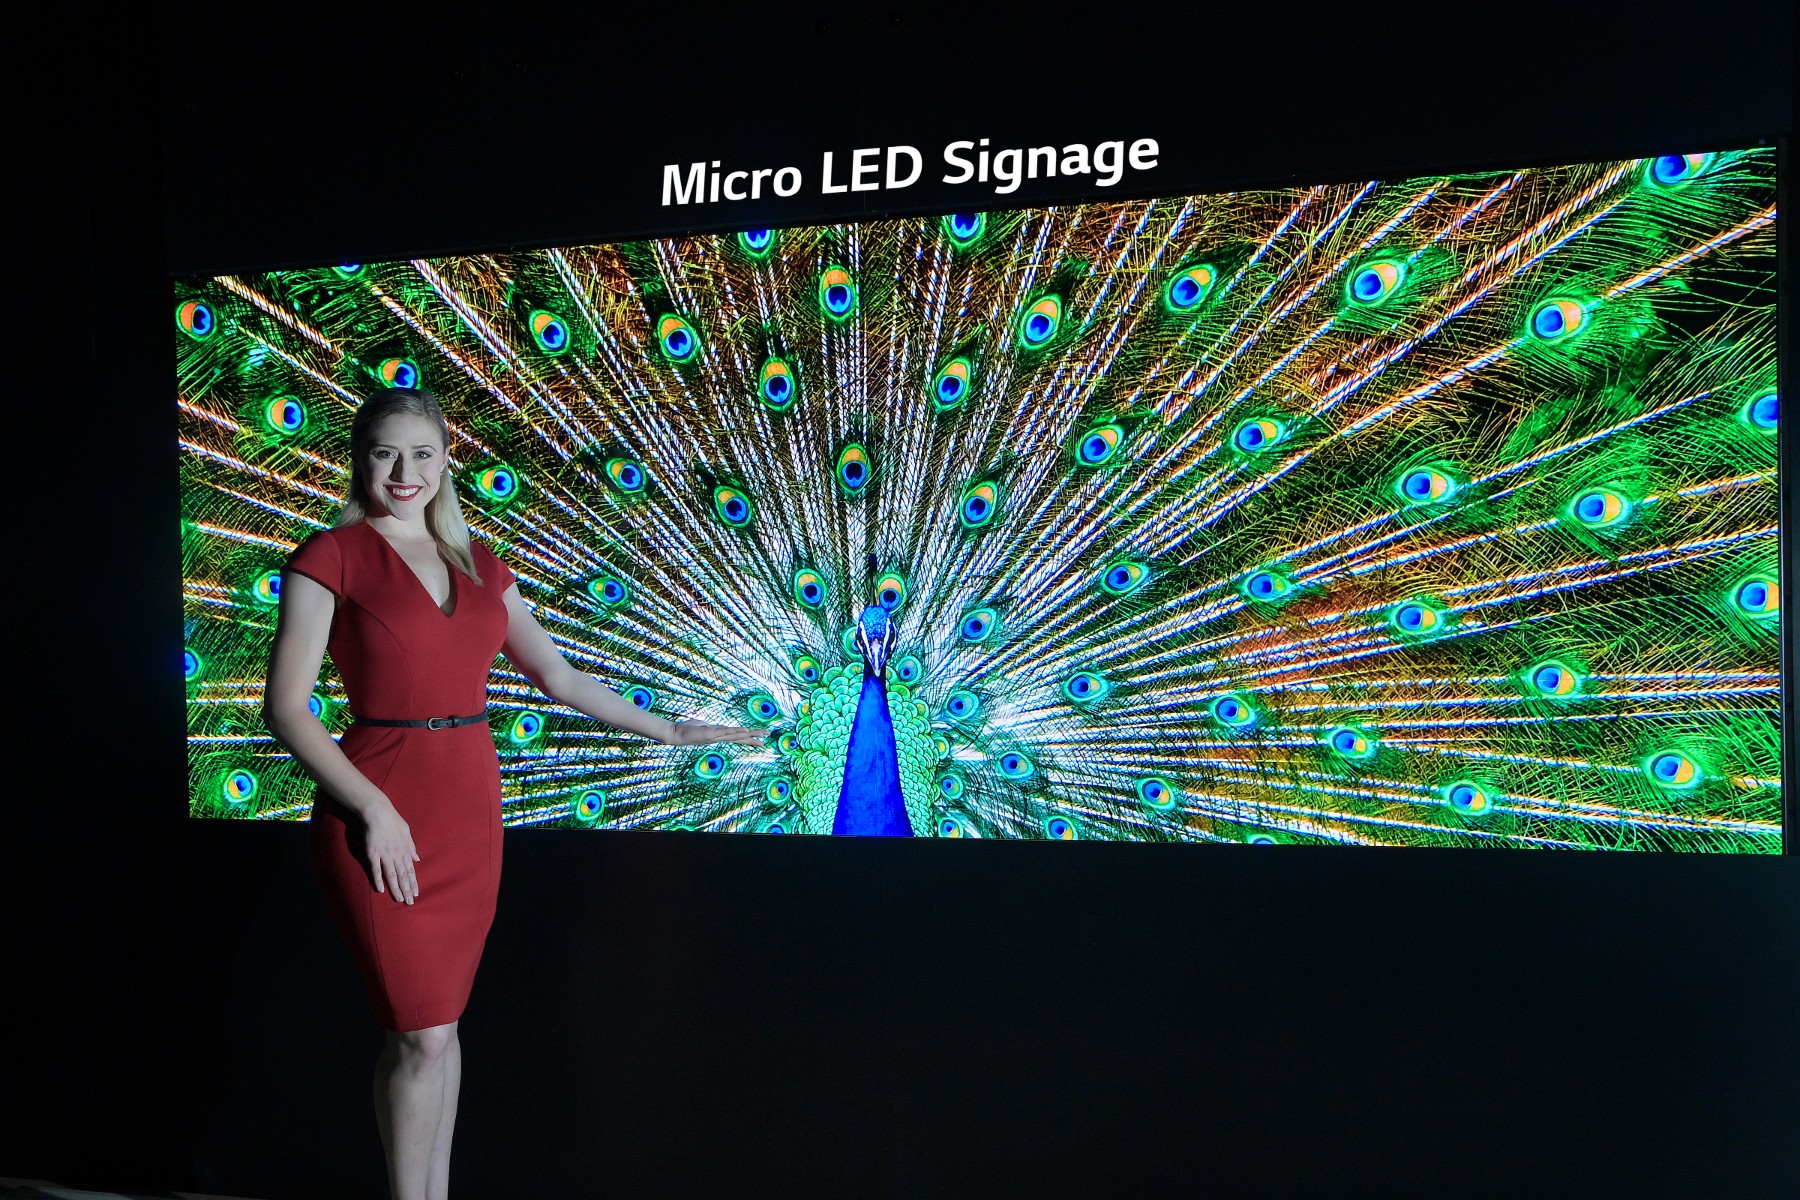 A model poses with the Micro LED signage.